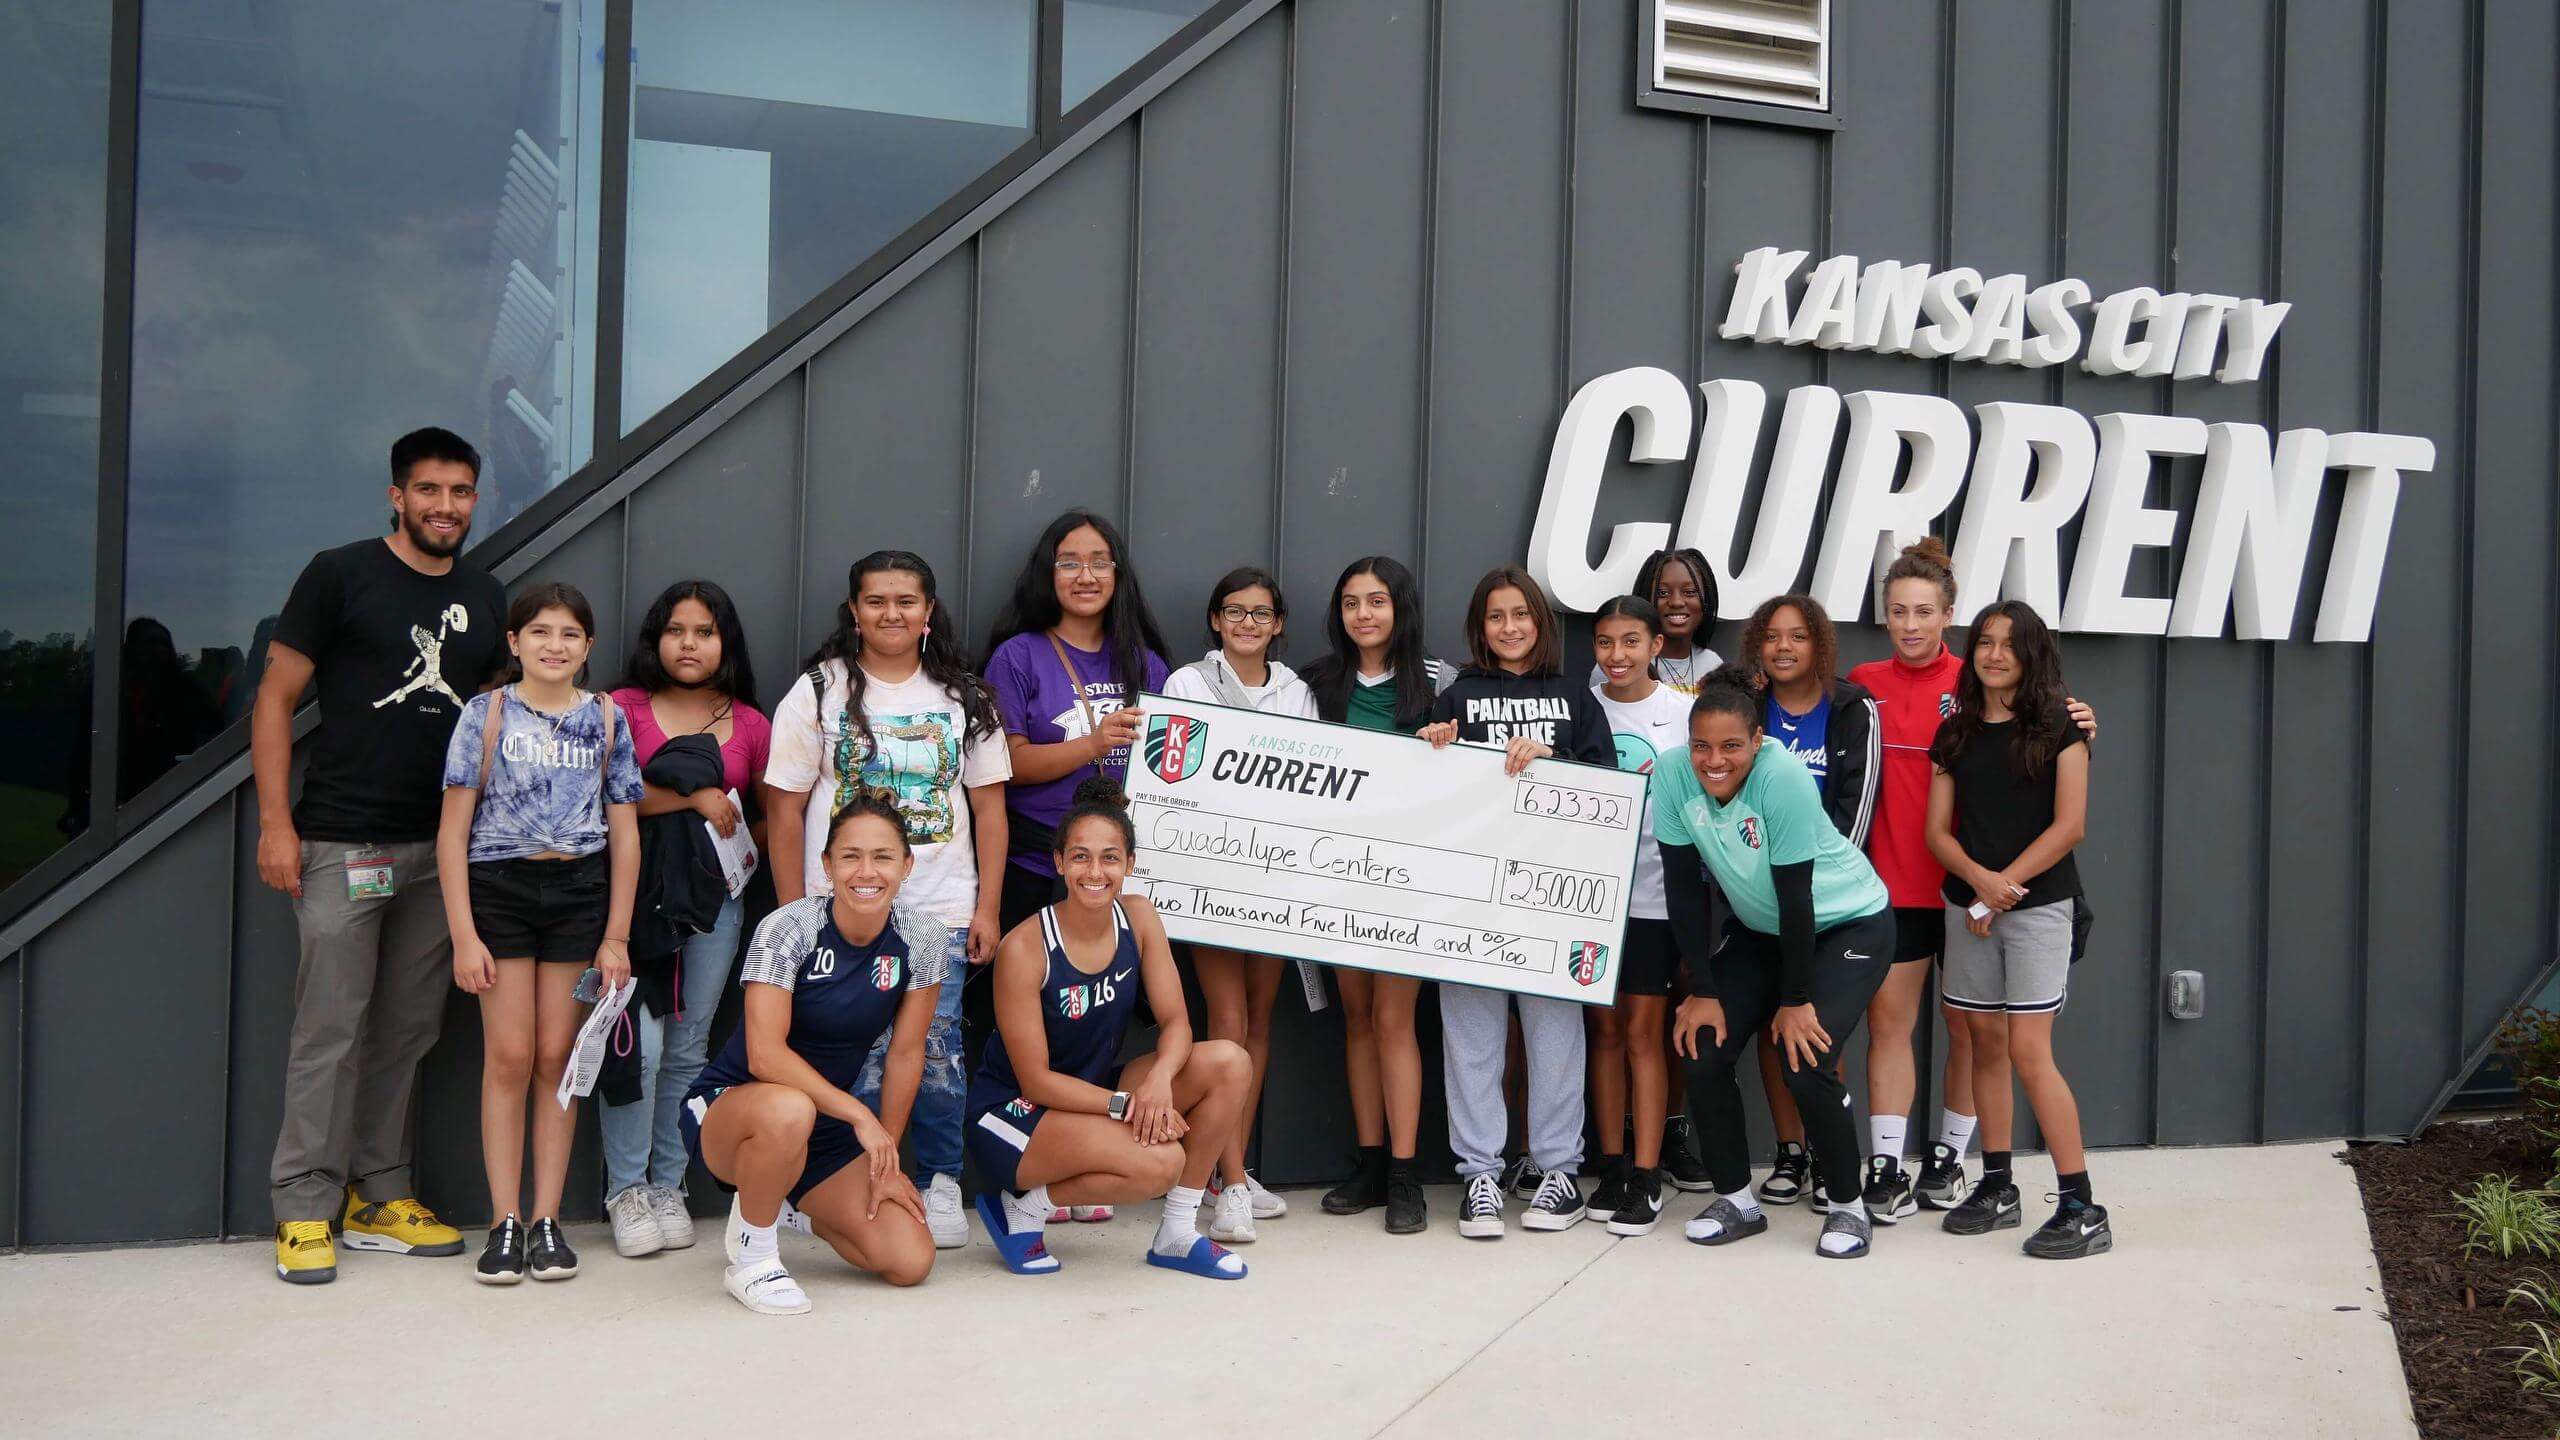 Guadalupe Centers receives check from KC Current